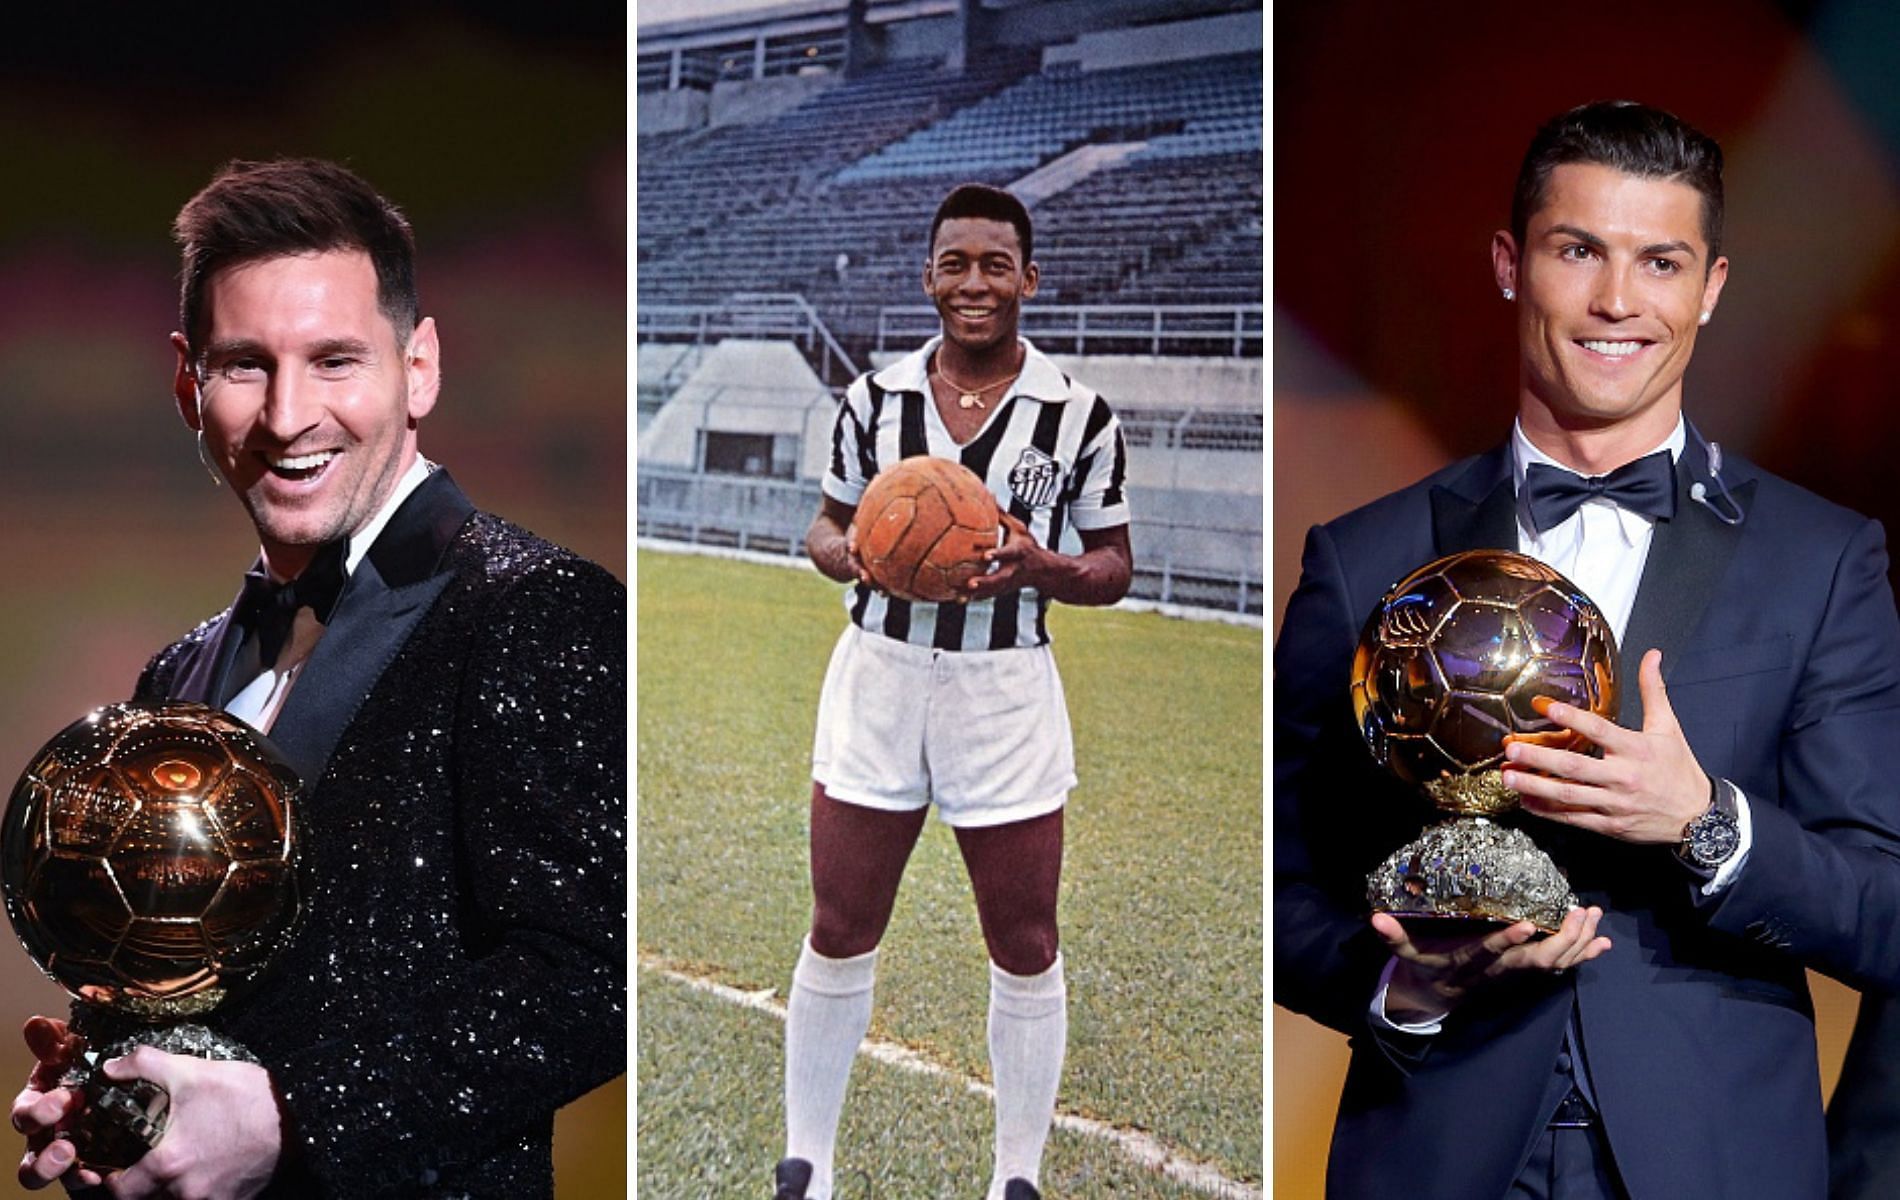 10 most expensive transfers in football history, ranked